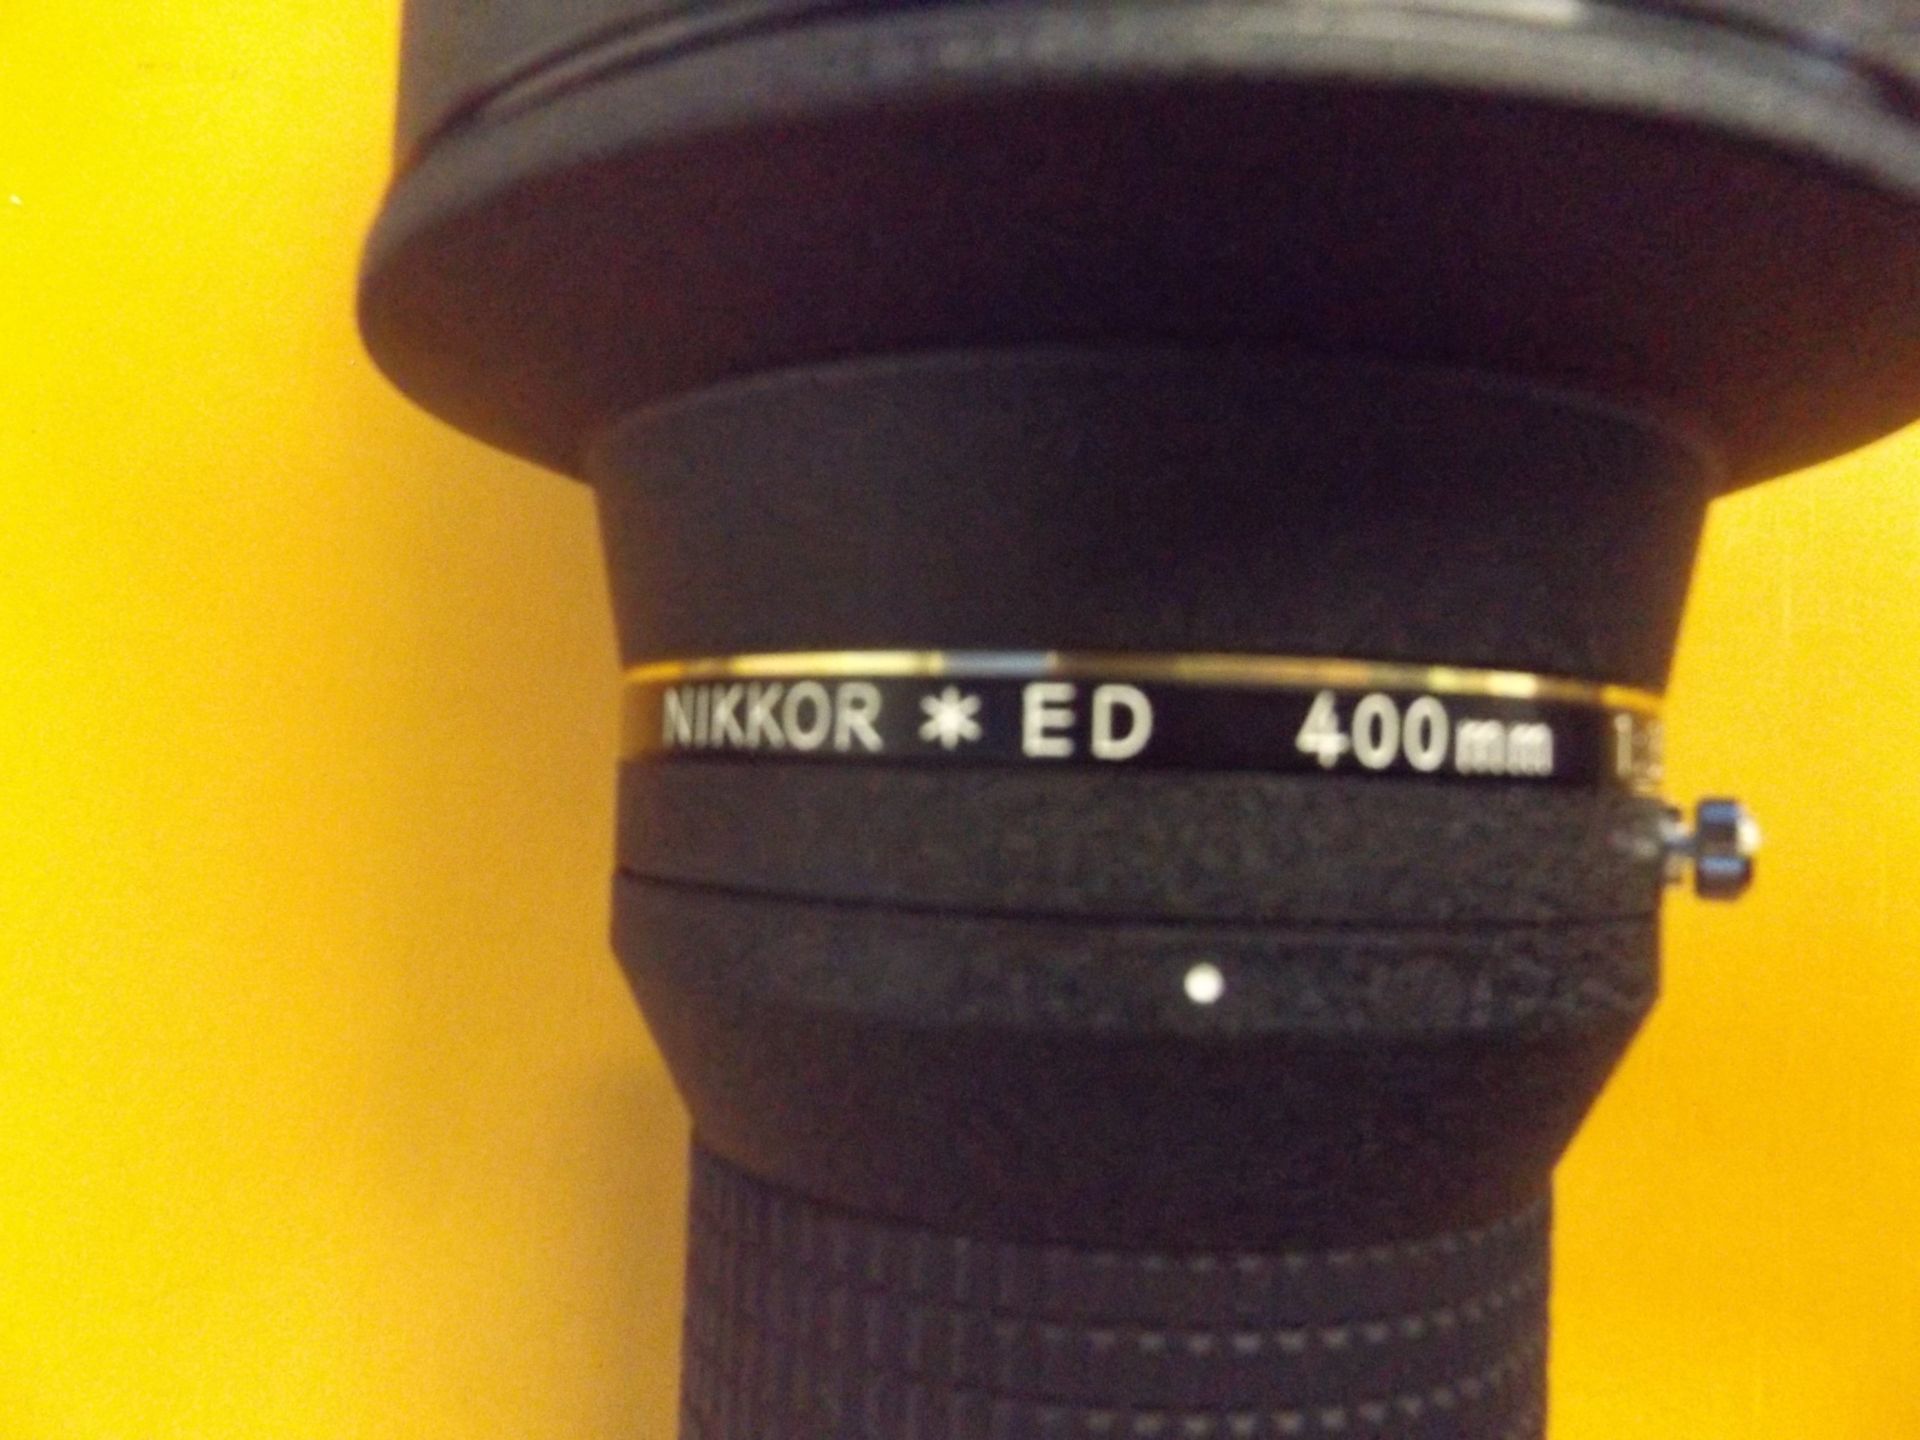 Nikon Nikkor ED 400mm f/3.5 IF Lense with Leather Case - Image 3 of 10